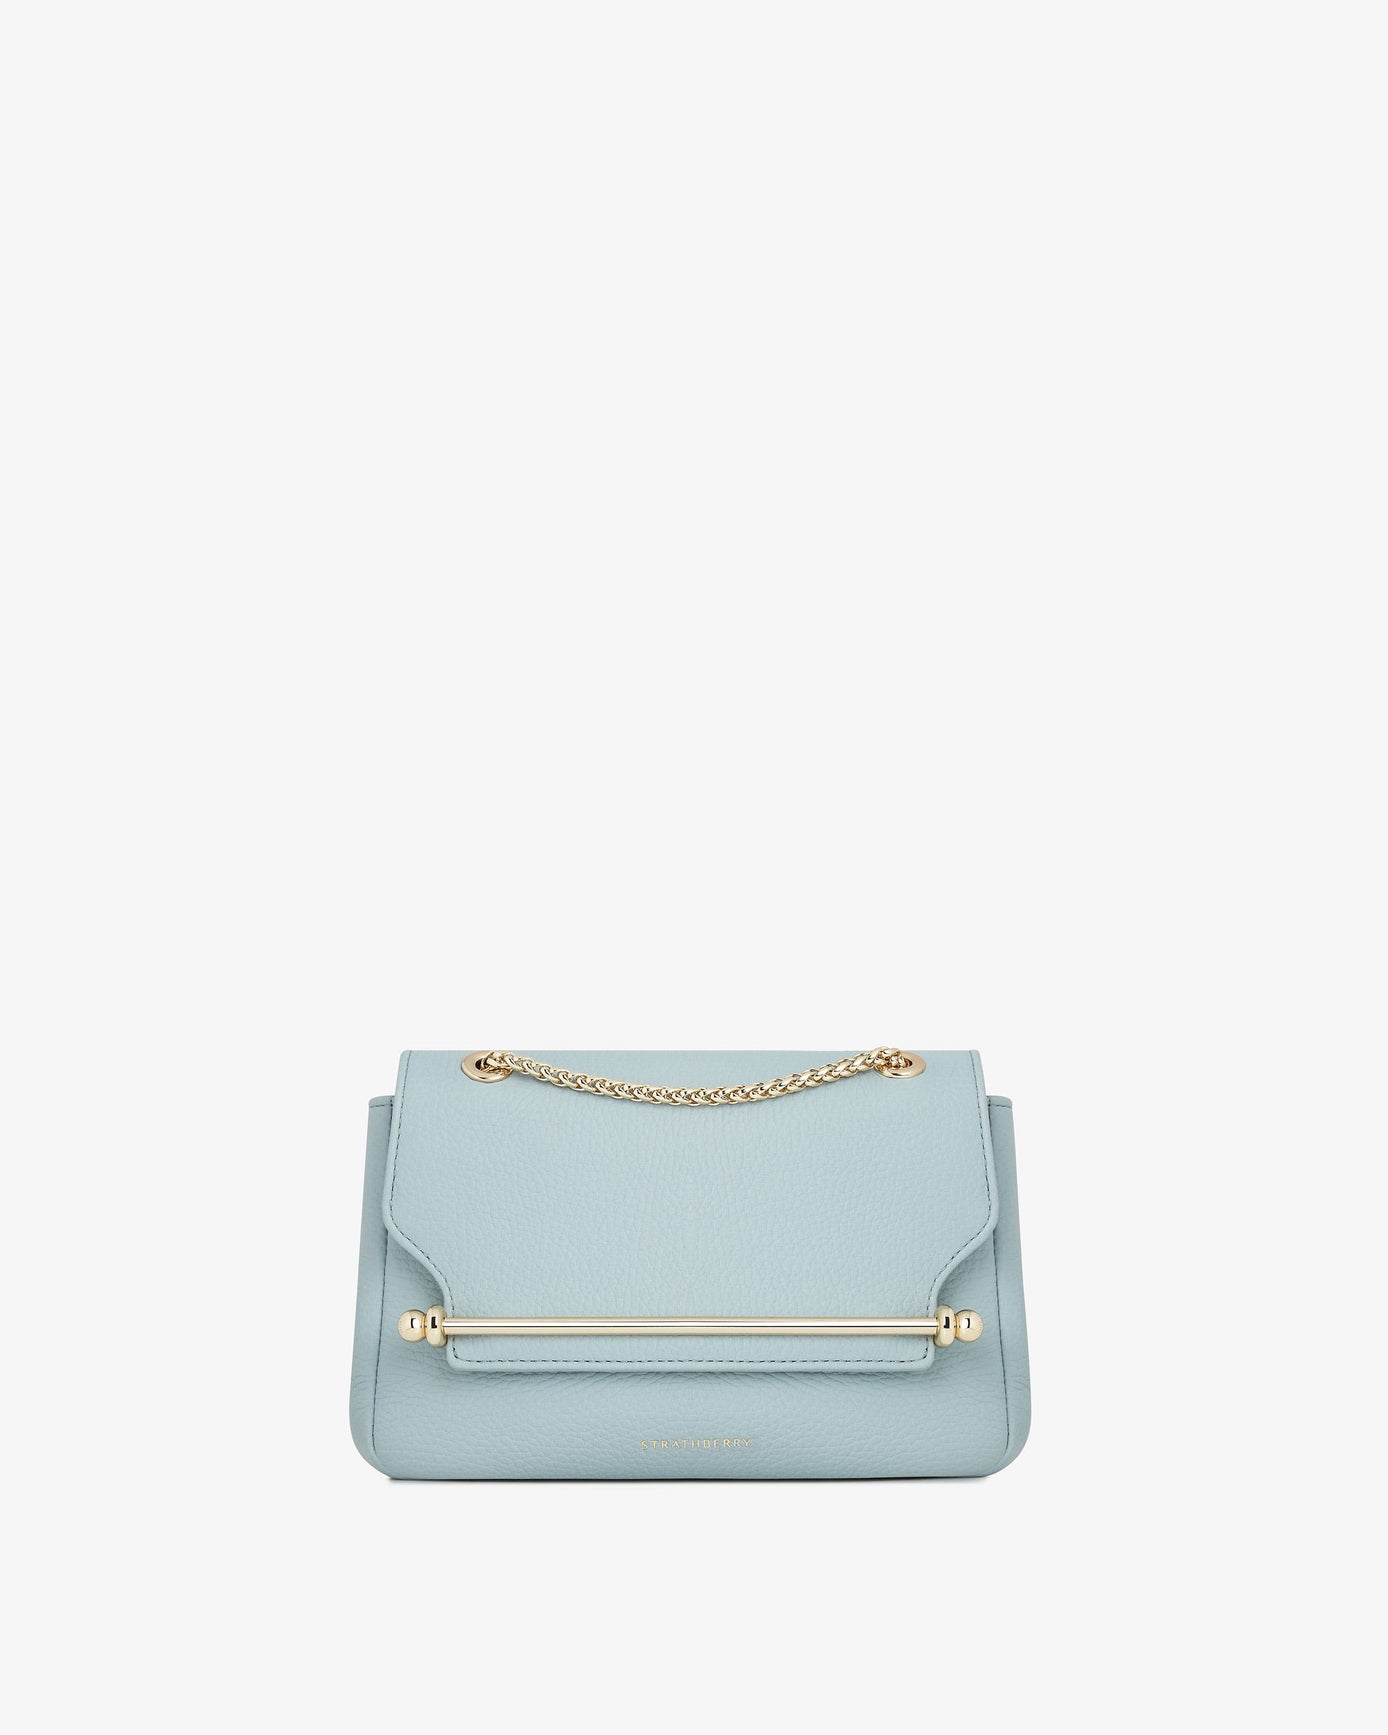 Strathberry - East/West Mini Soft - Blue | Strathberry